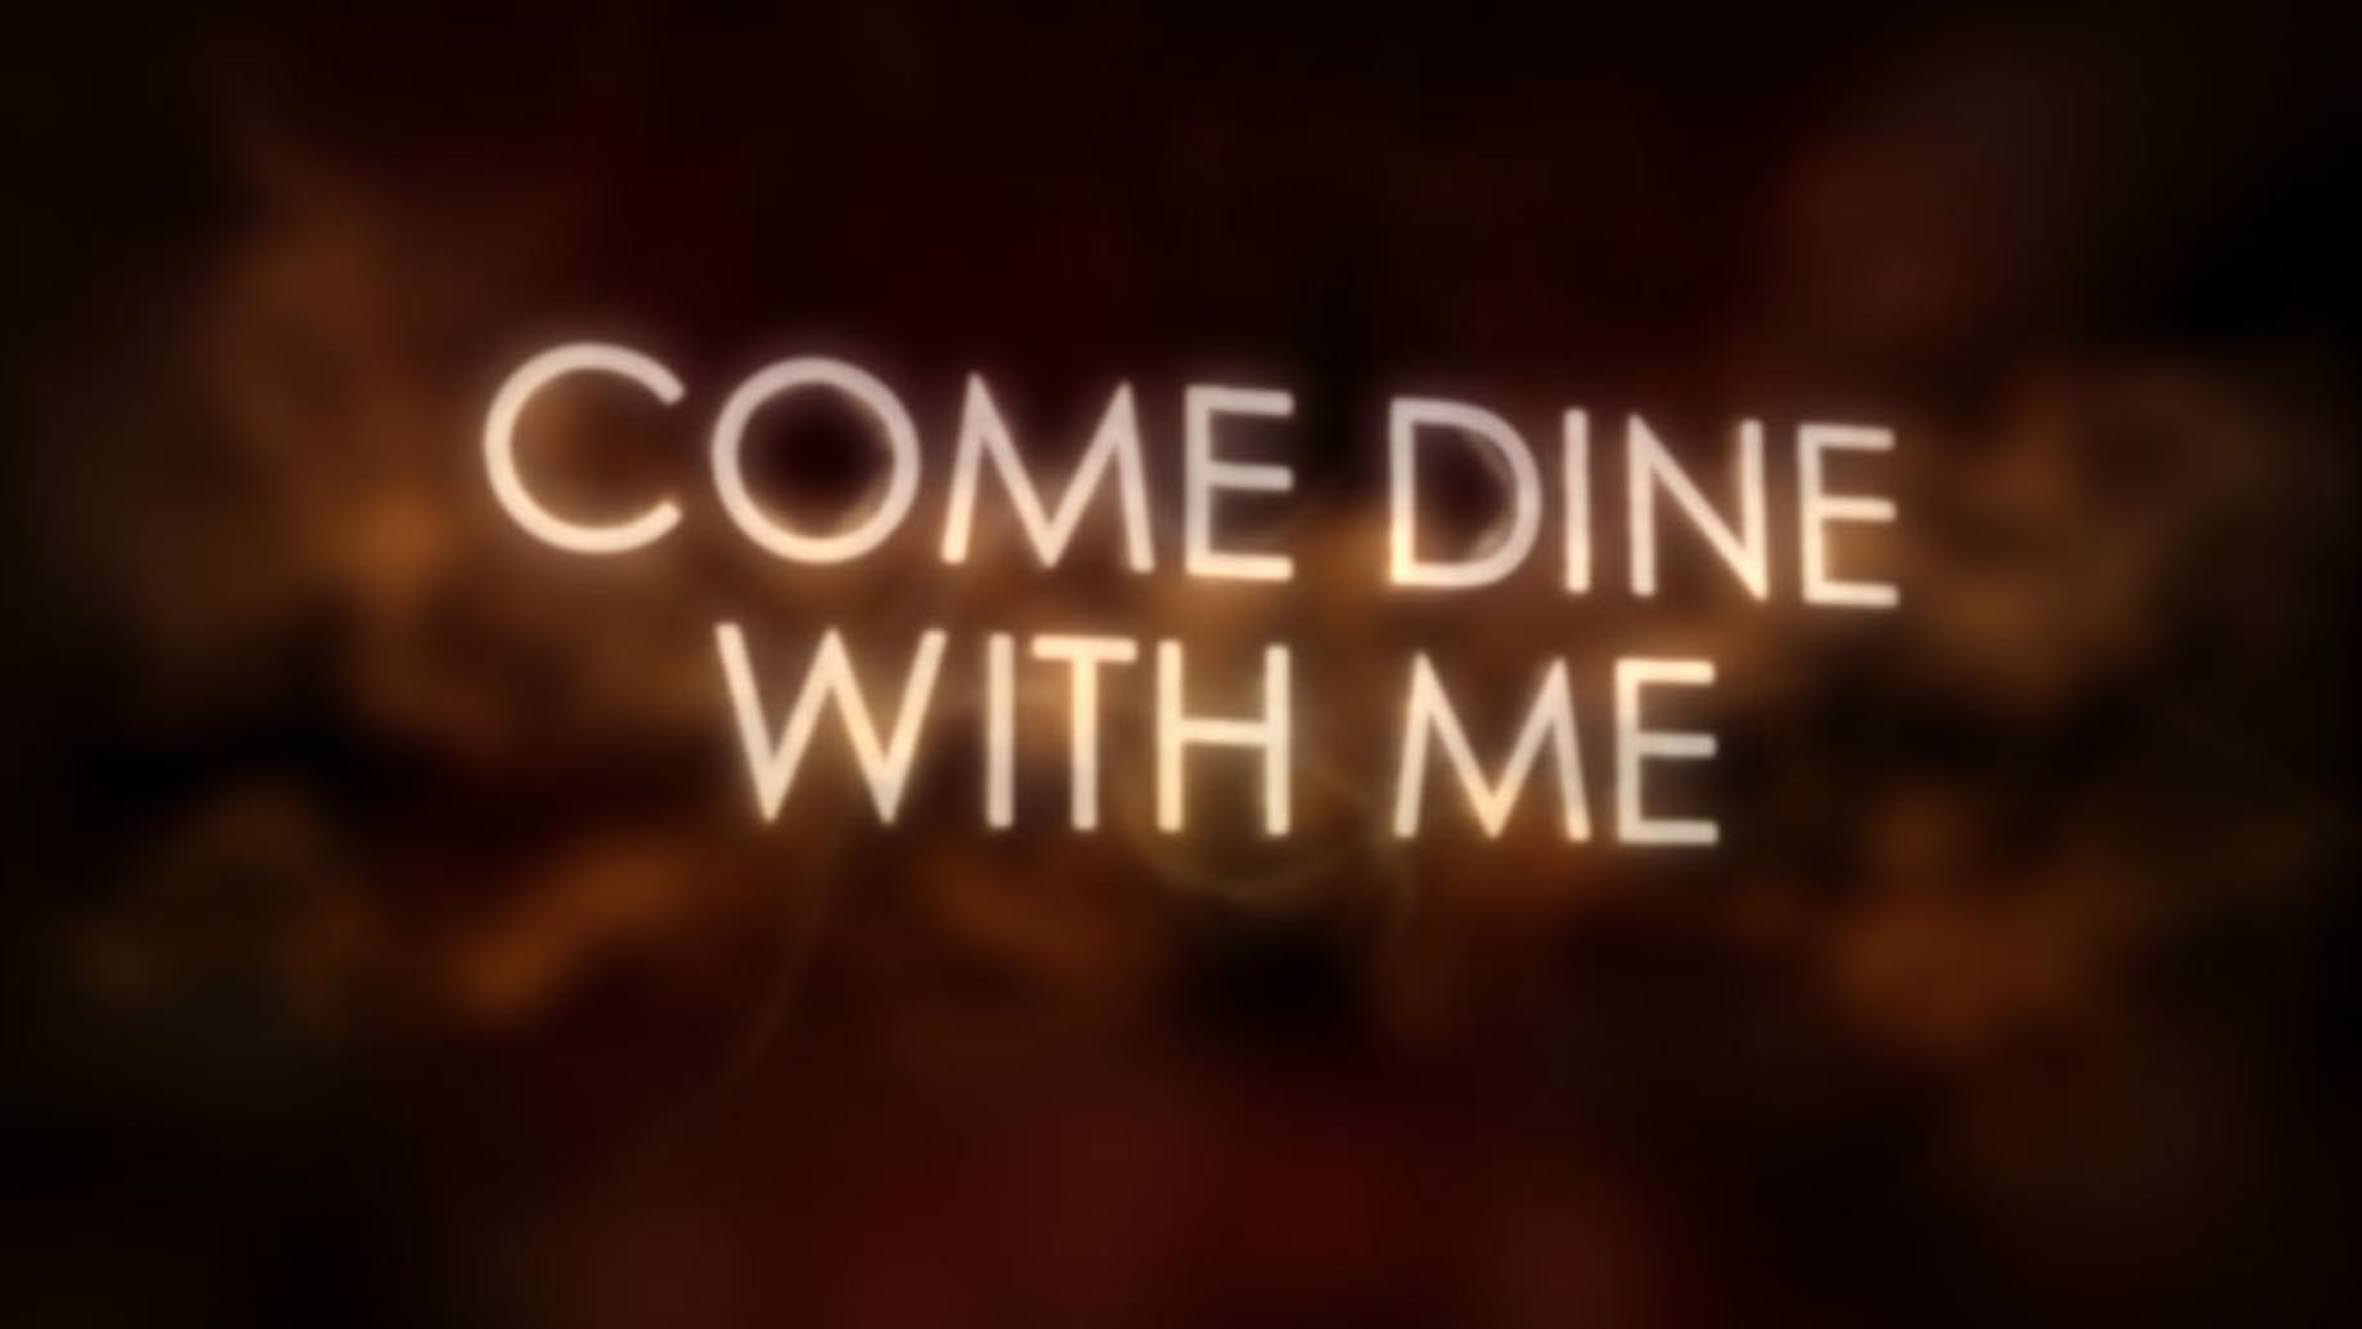 Did You Know These Truths Behind Come Dine With Me?